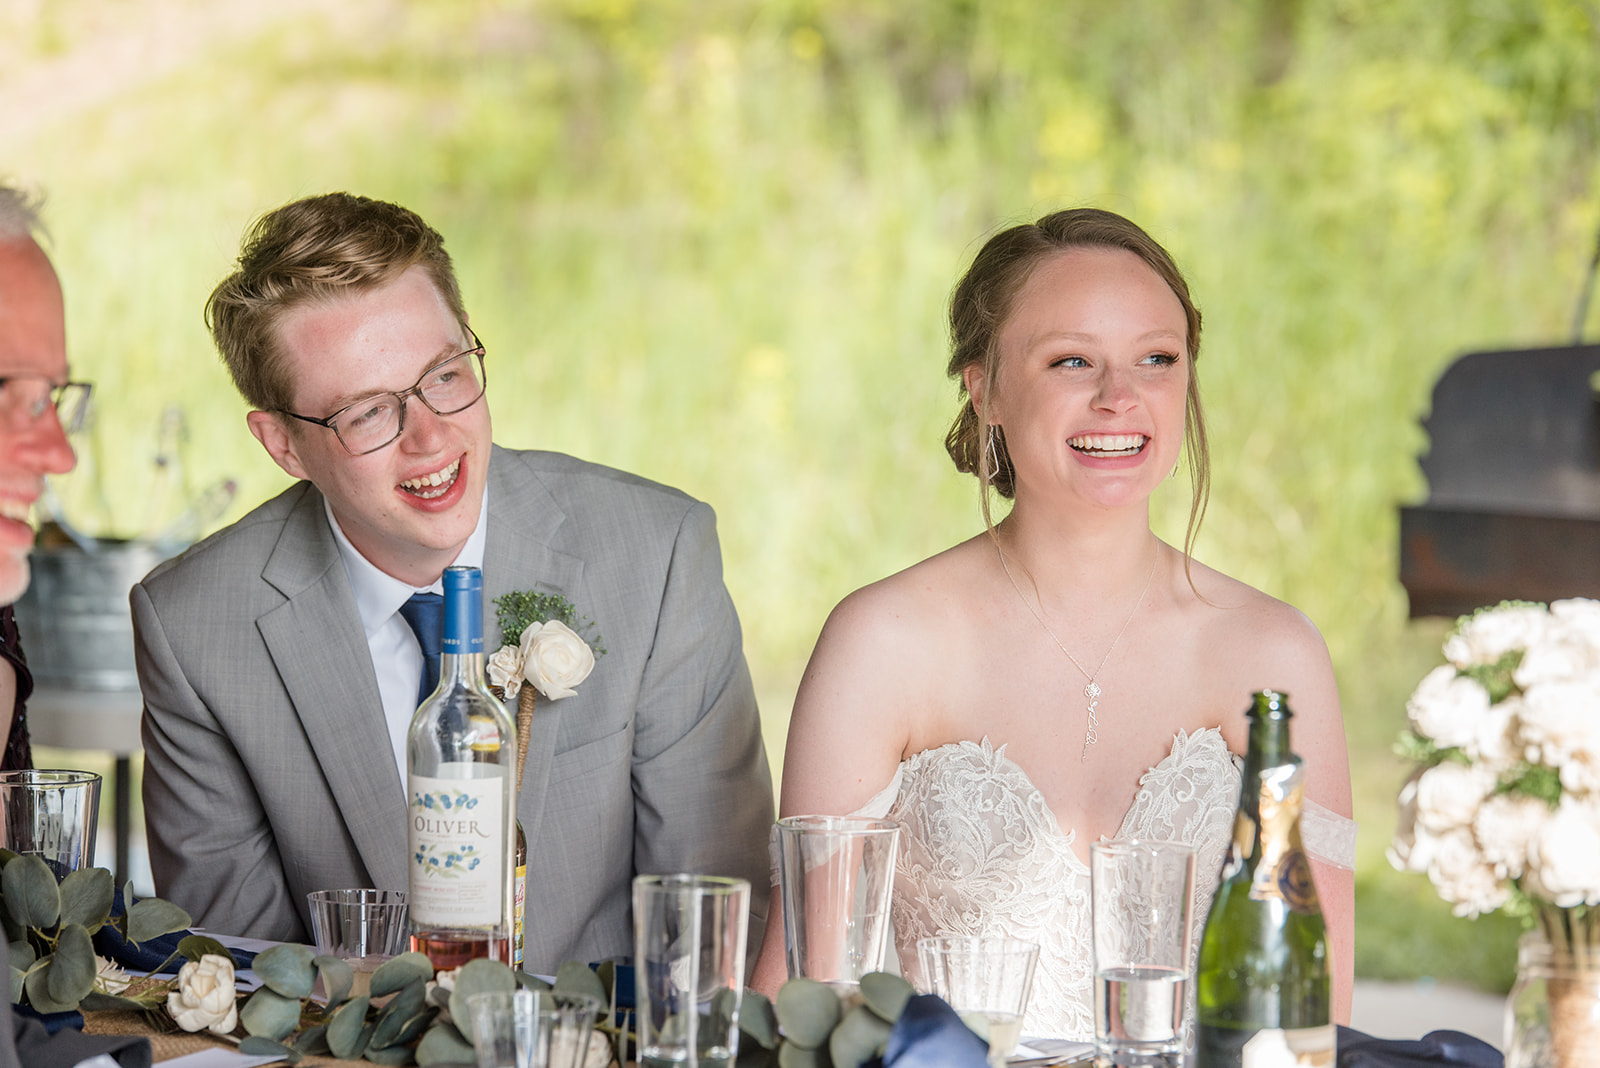 The bride and groom laugh during the toasts at their spring park wedding